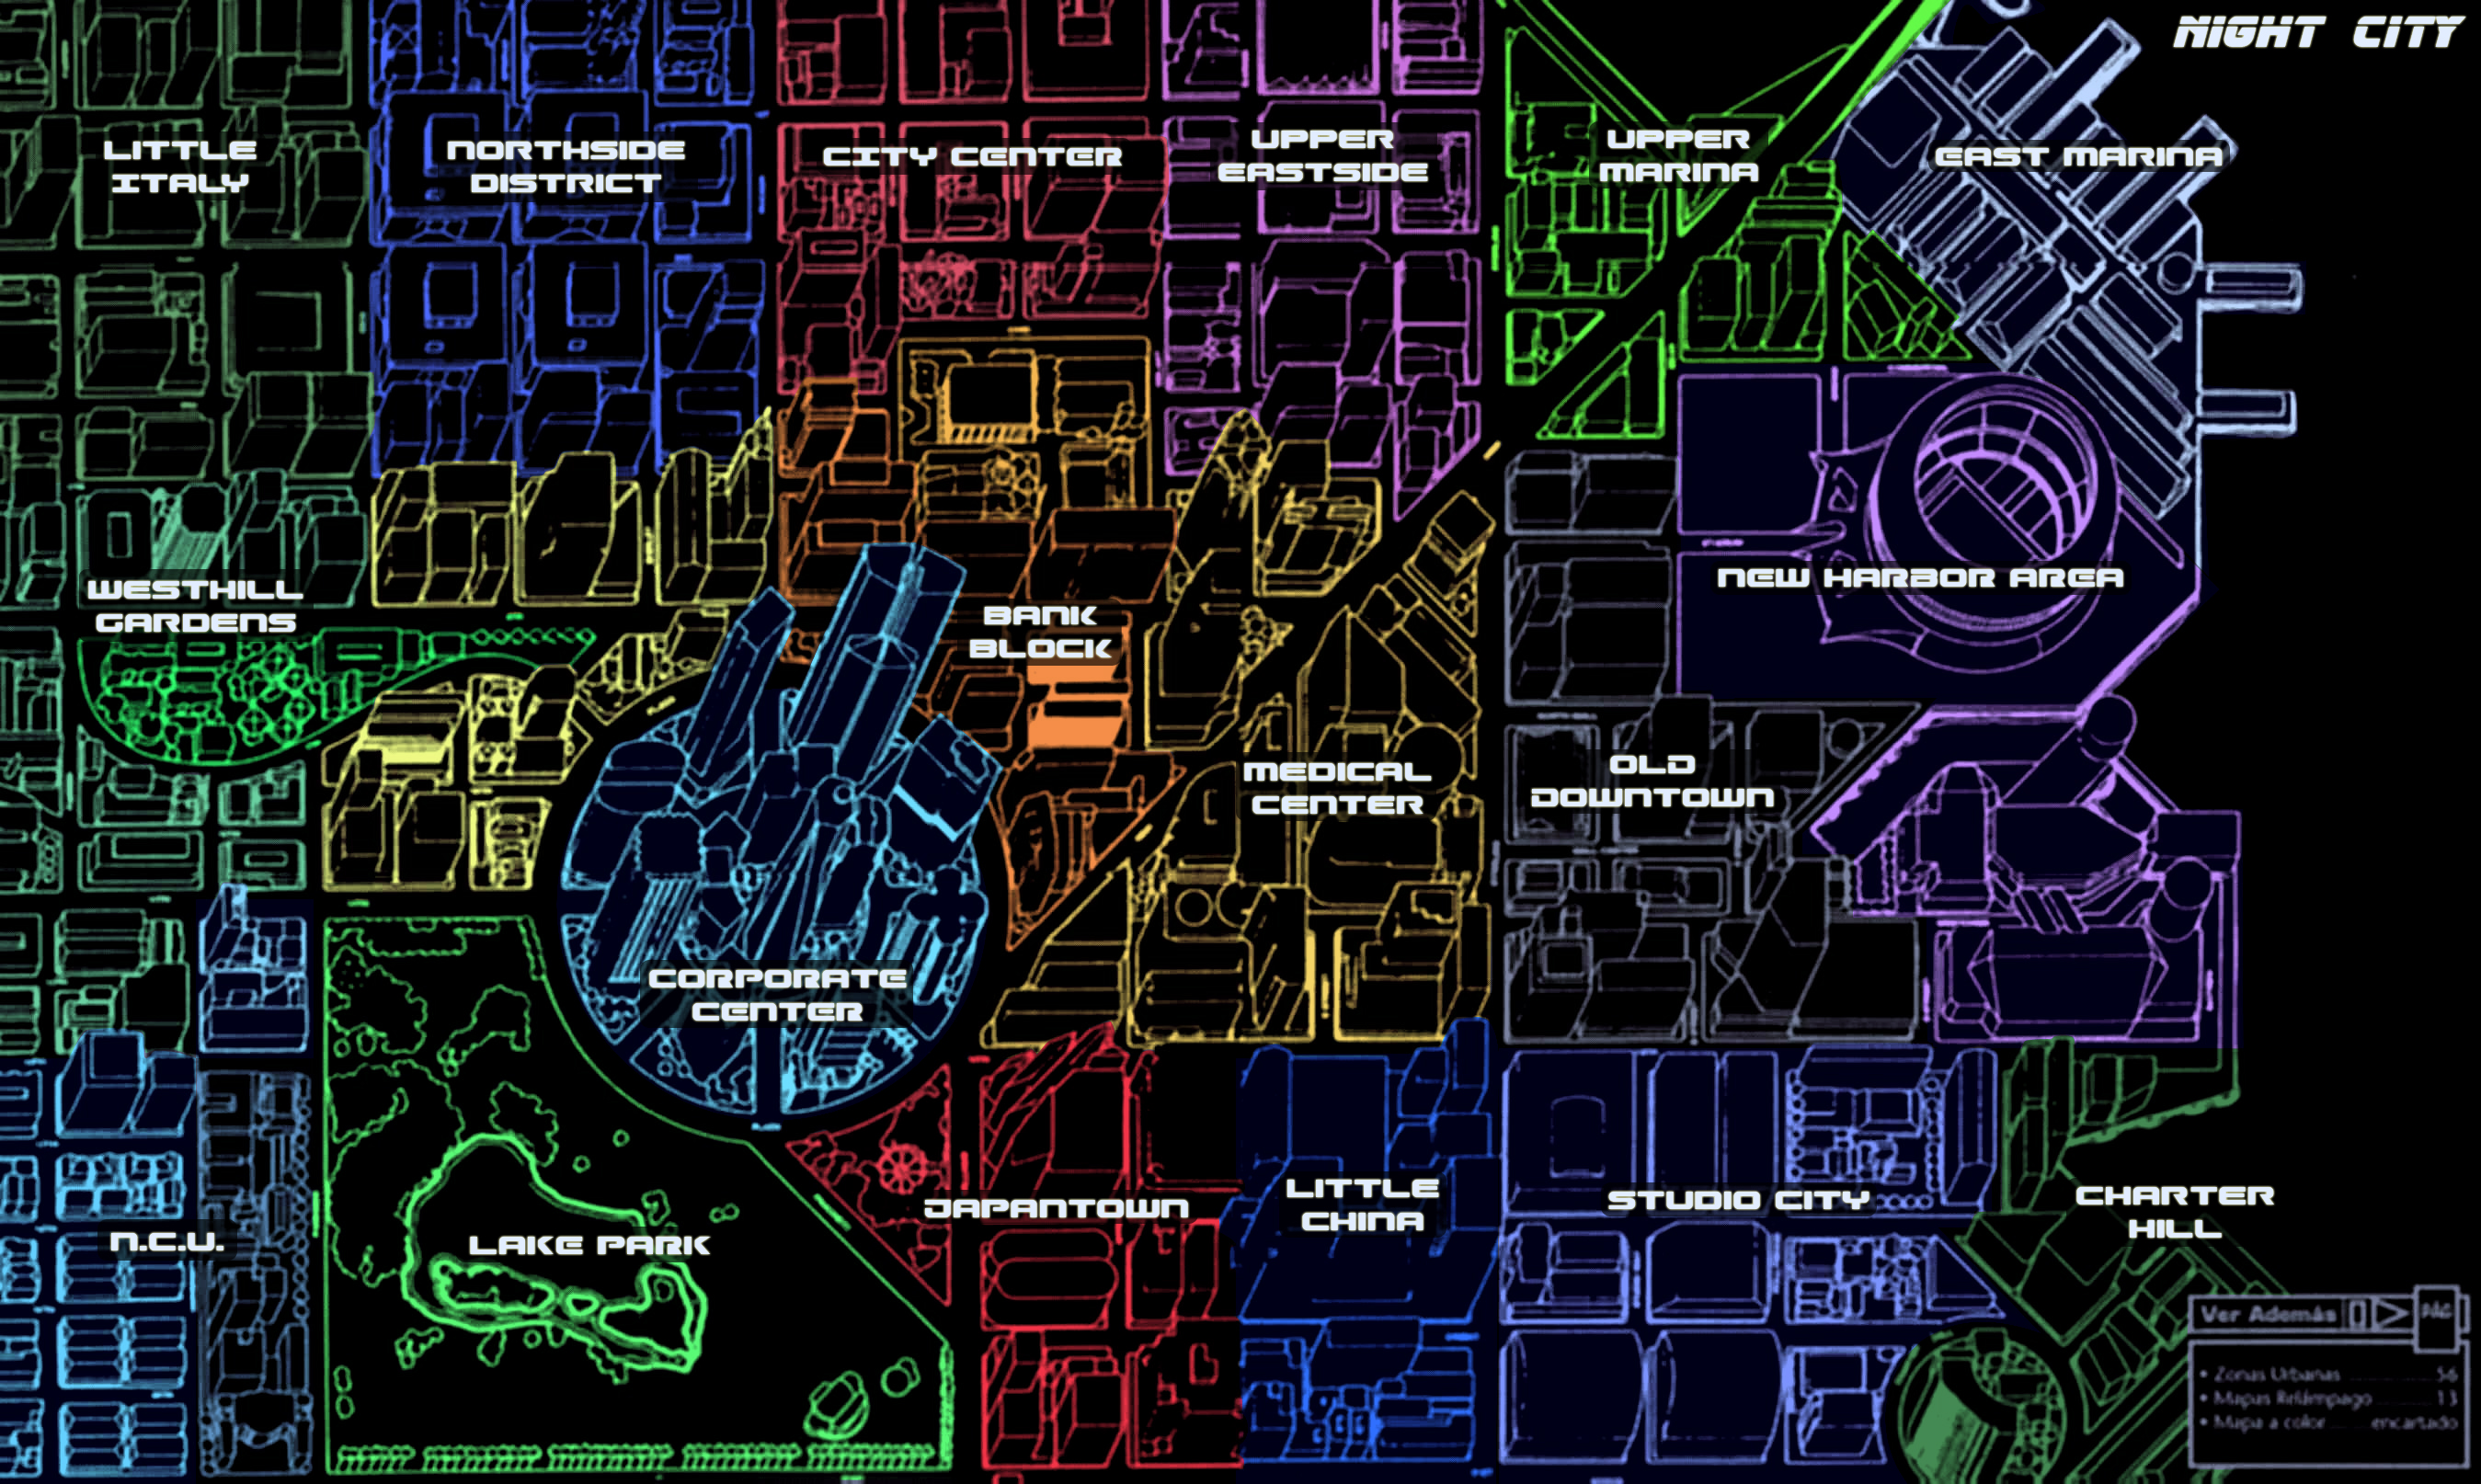 Cyberpunk 2020 - Map - Color Coded Night City Map